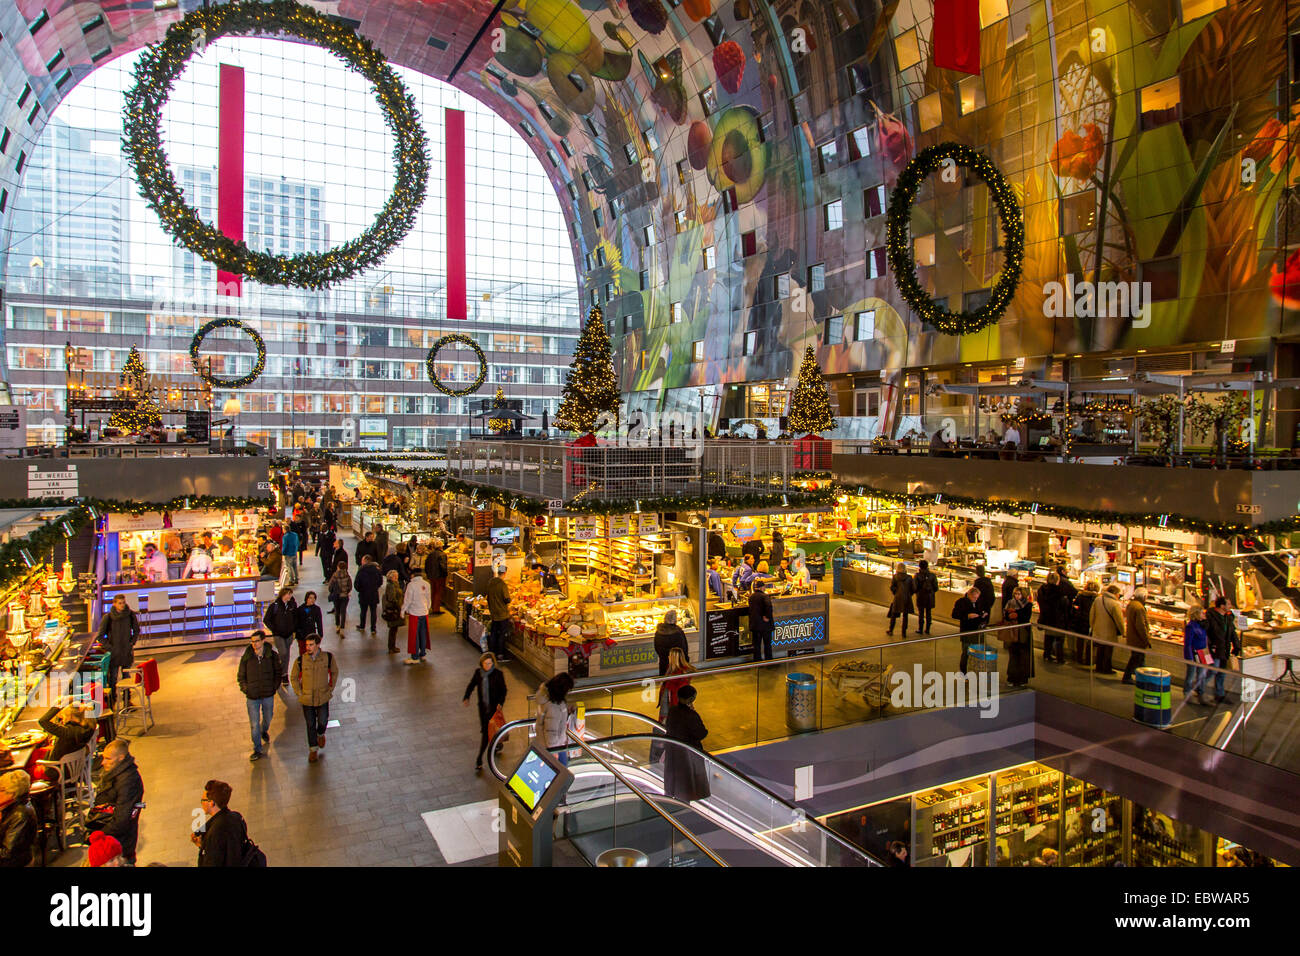 The new Market Hall in Rotterdam, restaurants, food shops, market, giant wall paintings, Stock Photo